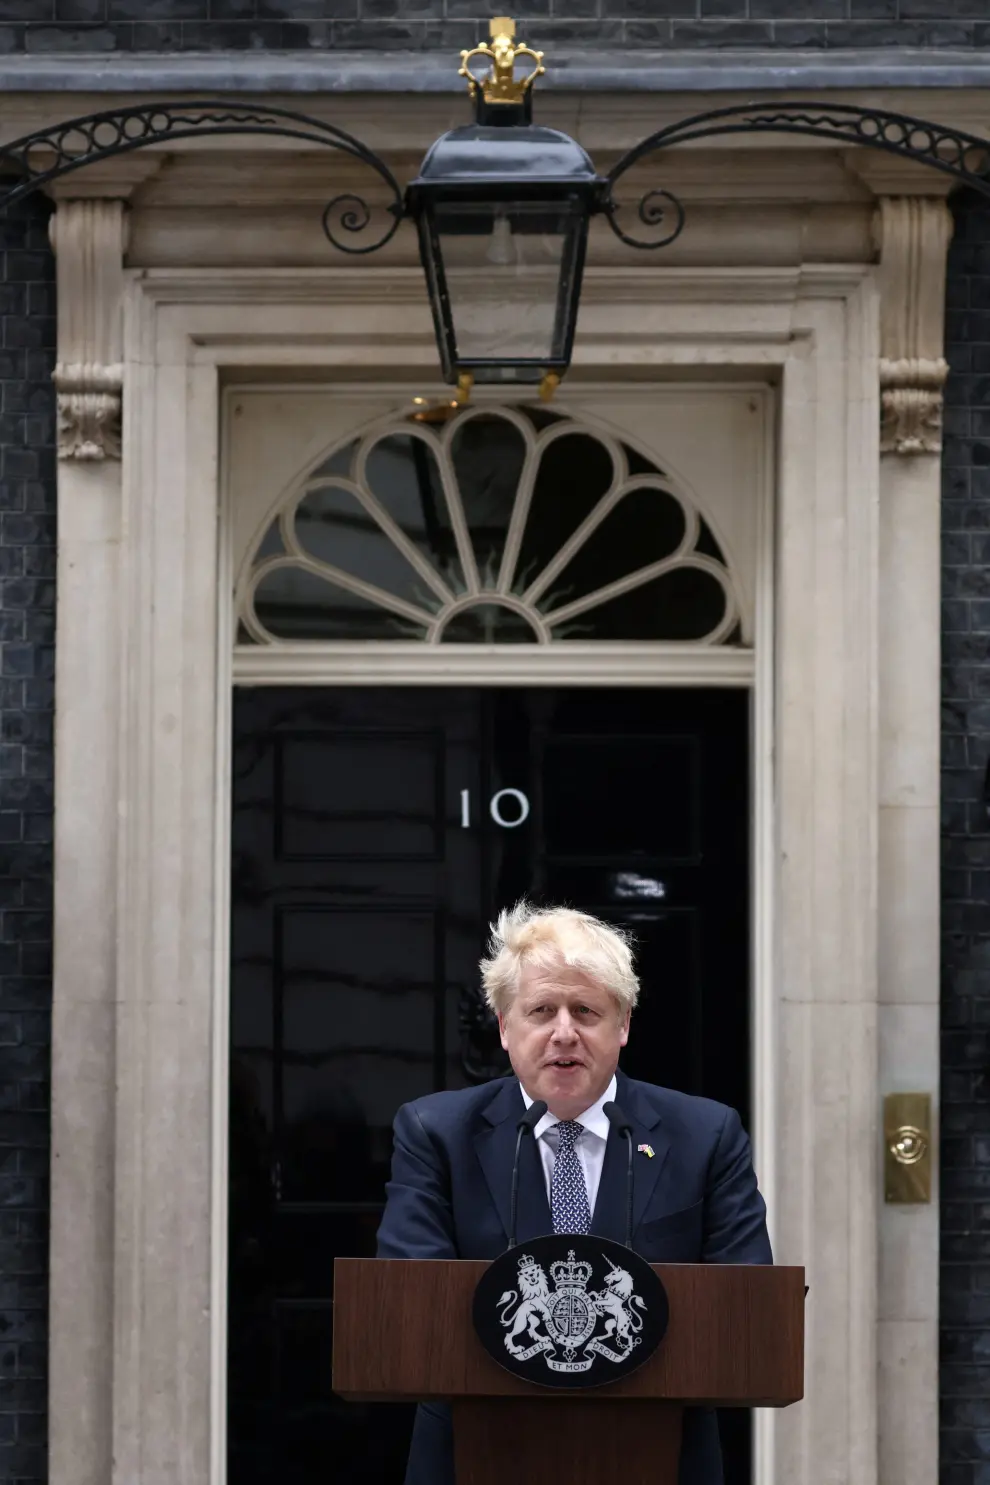 London (United Kingdom), 07/07/2022.- British Prime Minister Boris Johnson announces his resignation as leader of the Conservative Party in Downing Street, London, Britain 7 July 2022. Johnson resigned as Tory Party leader after he lost support in his own government and party. He is expected to stay in post until a successor is elected, expected to be in the autumn. (Reino Unido, Londres) EFE/EPA/TOLGA AKMEN
 BRITAIN POLITICS JOHNSON RESIGNATION